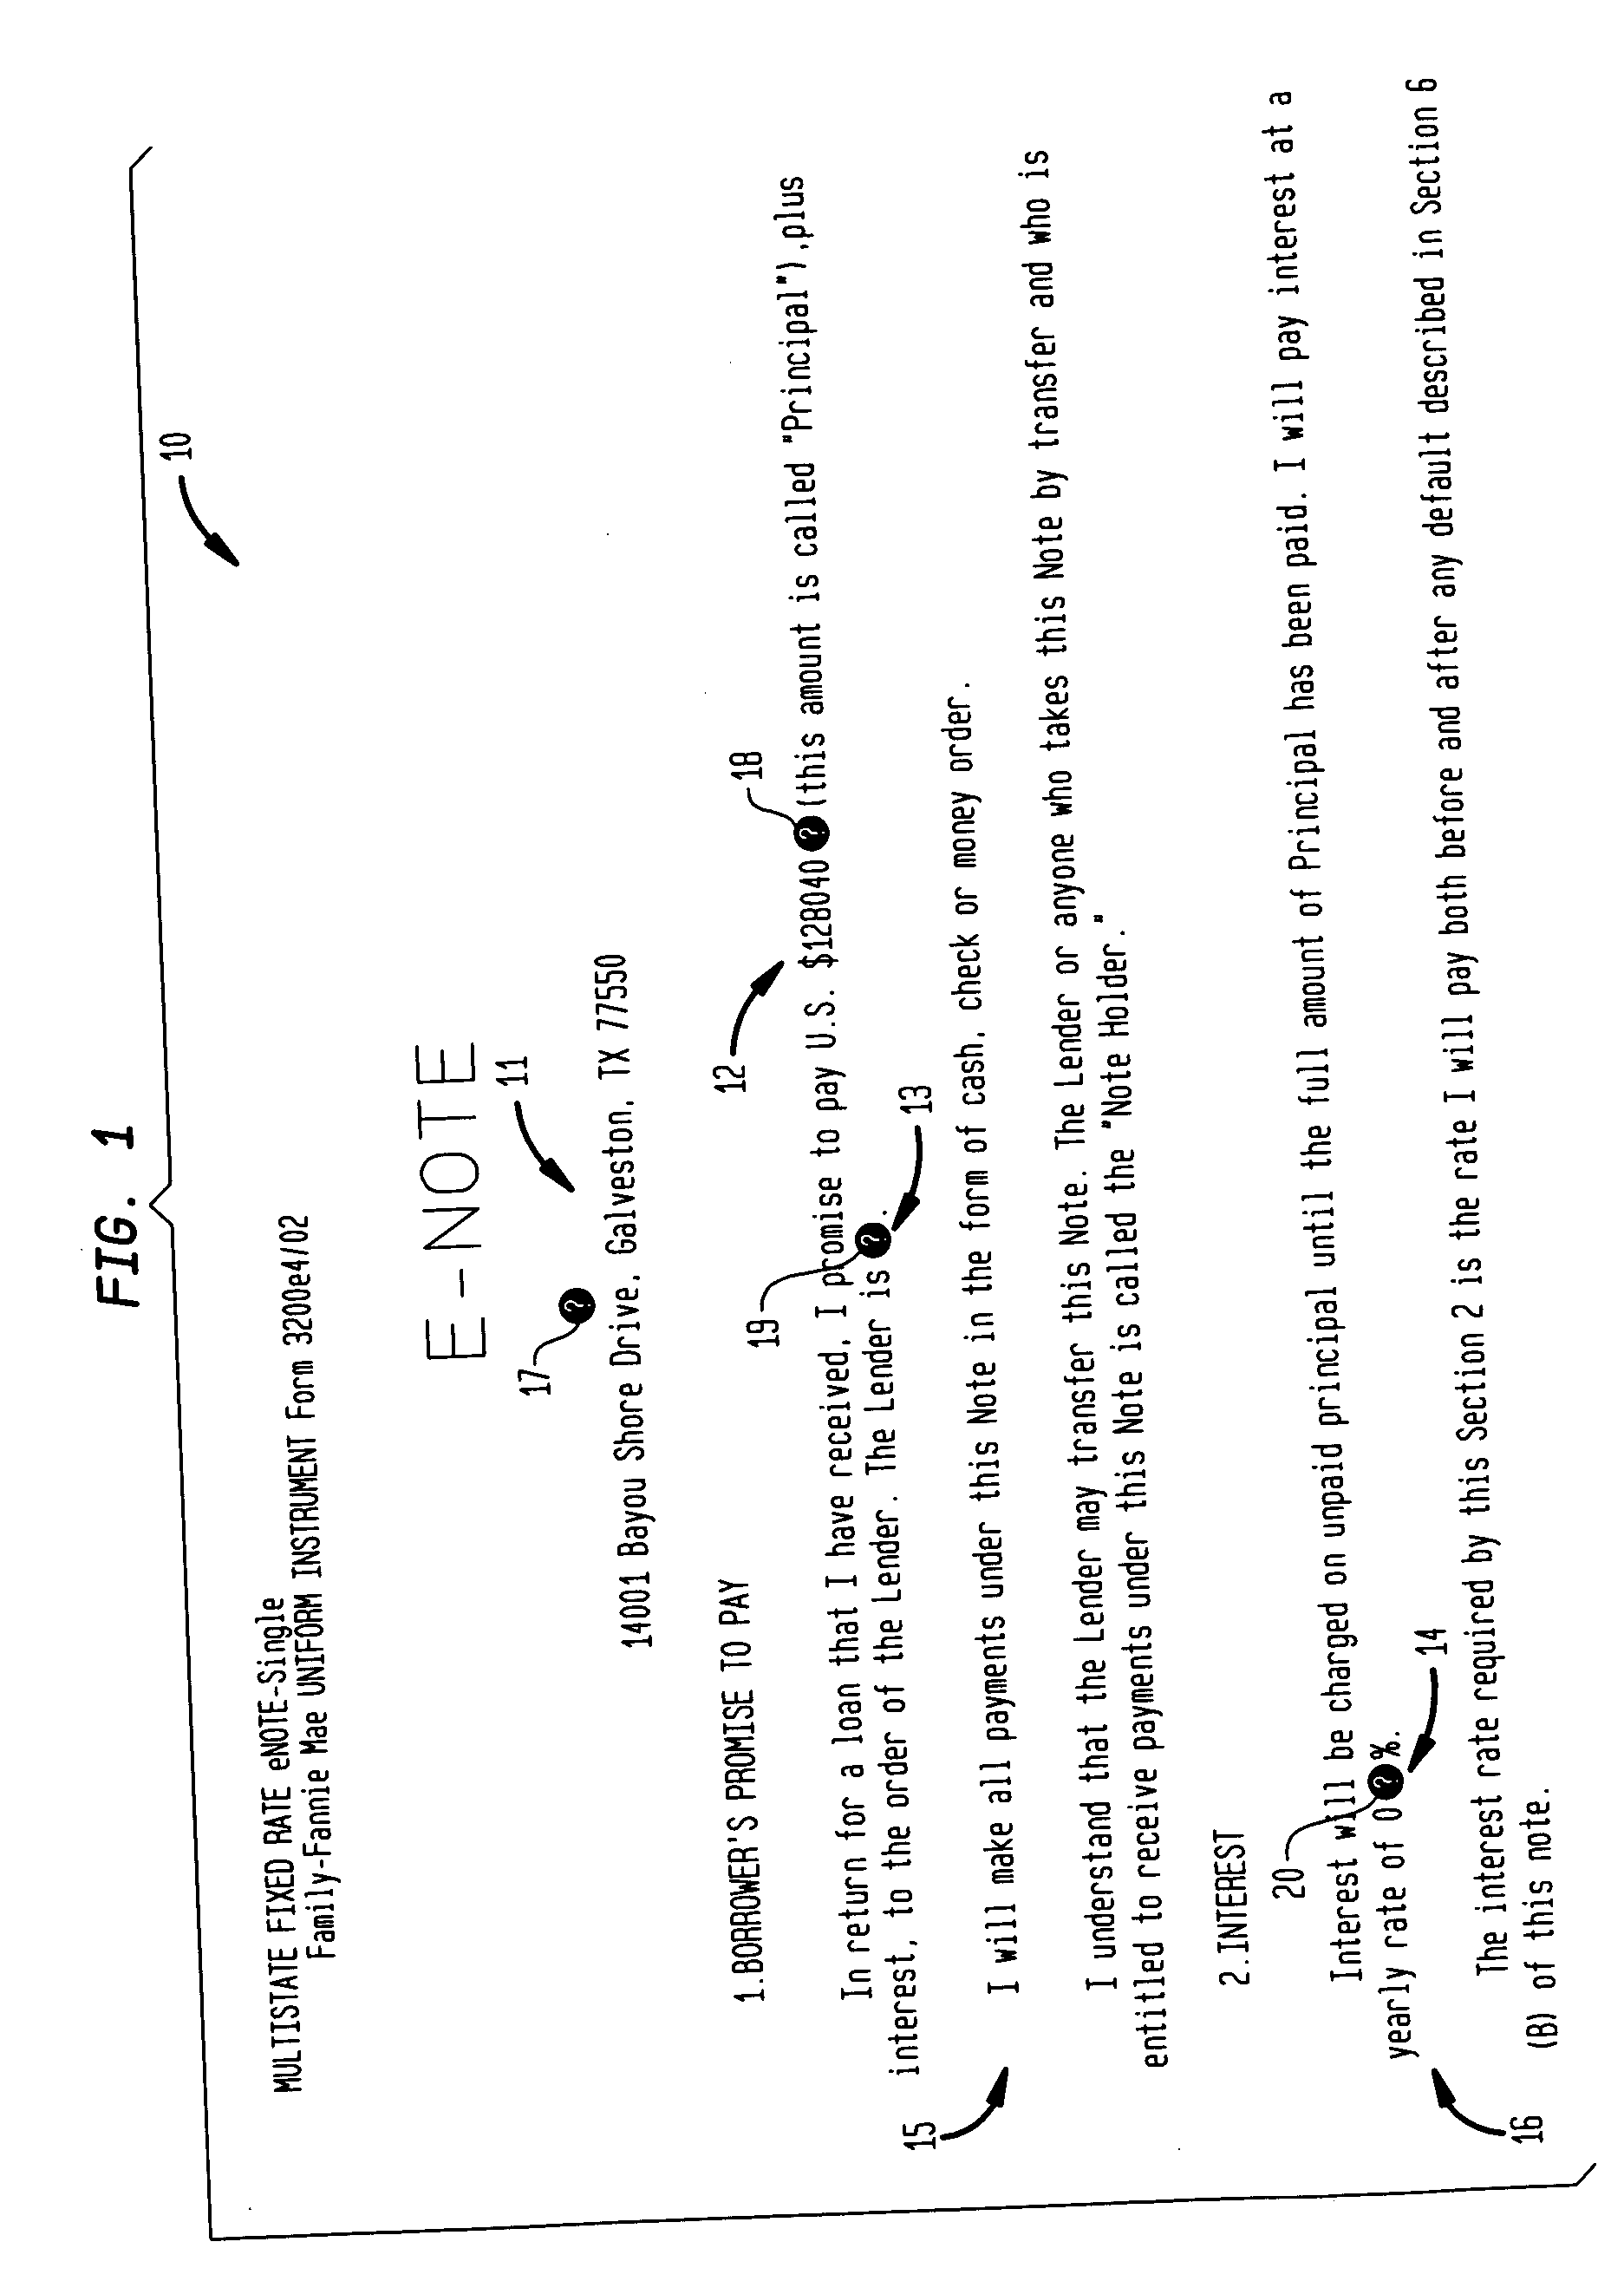 Method and system for embedding user assistance in documents utilizing markup languages